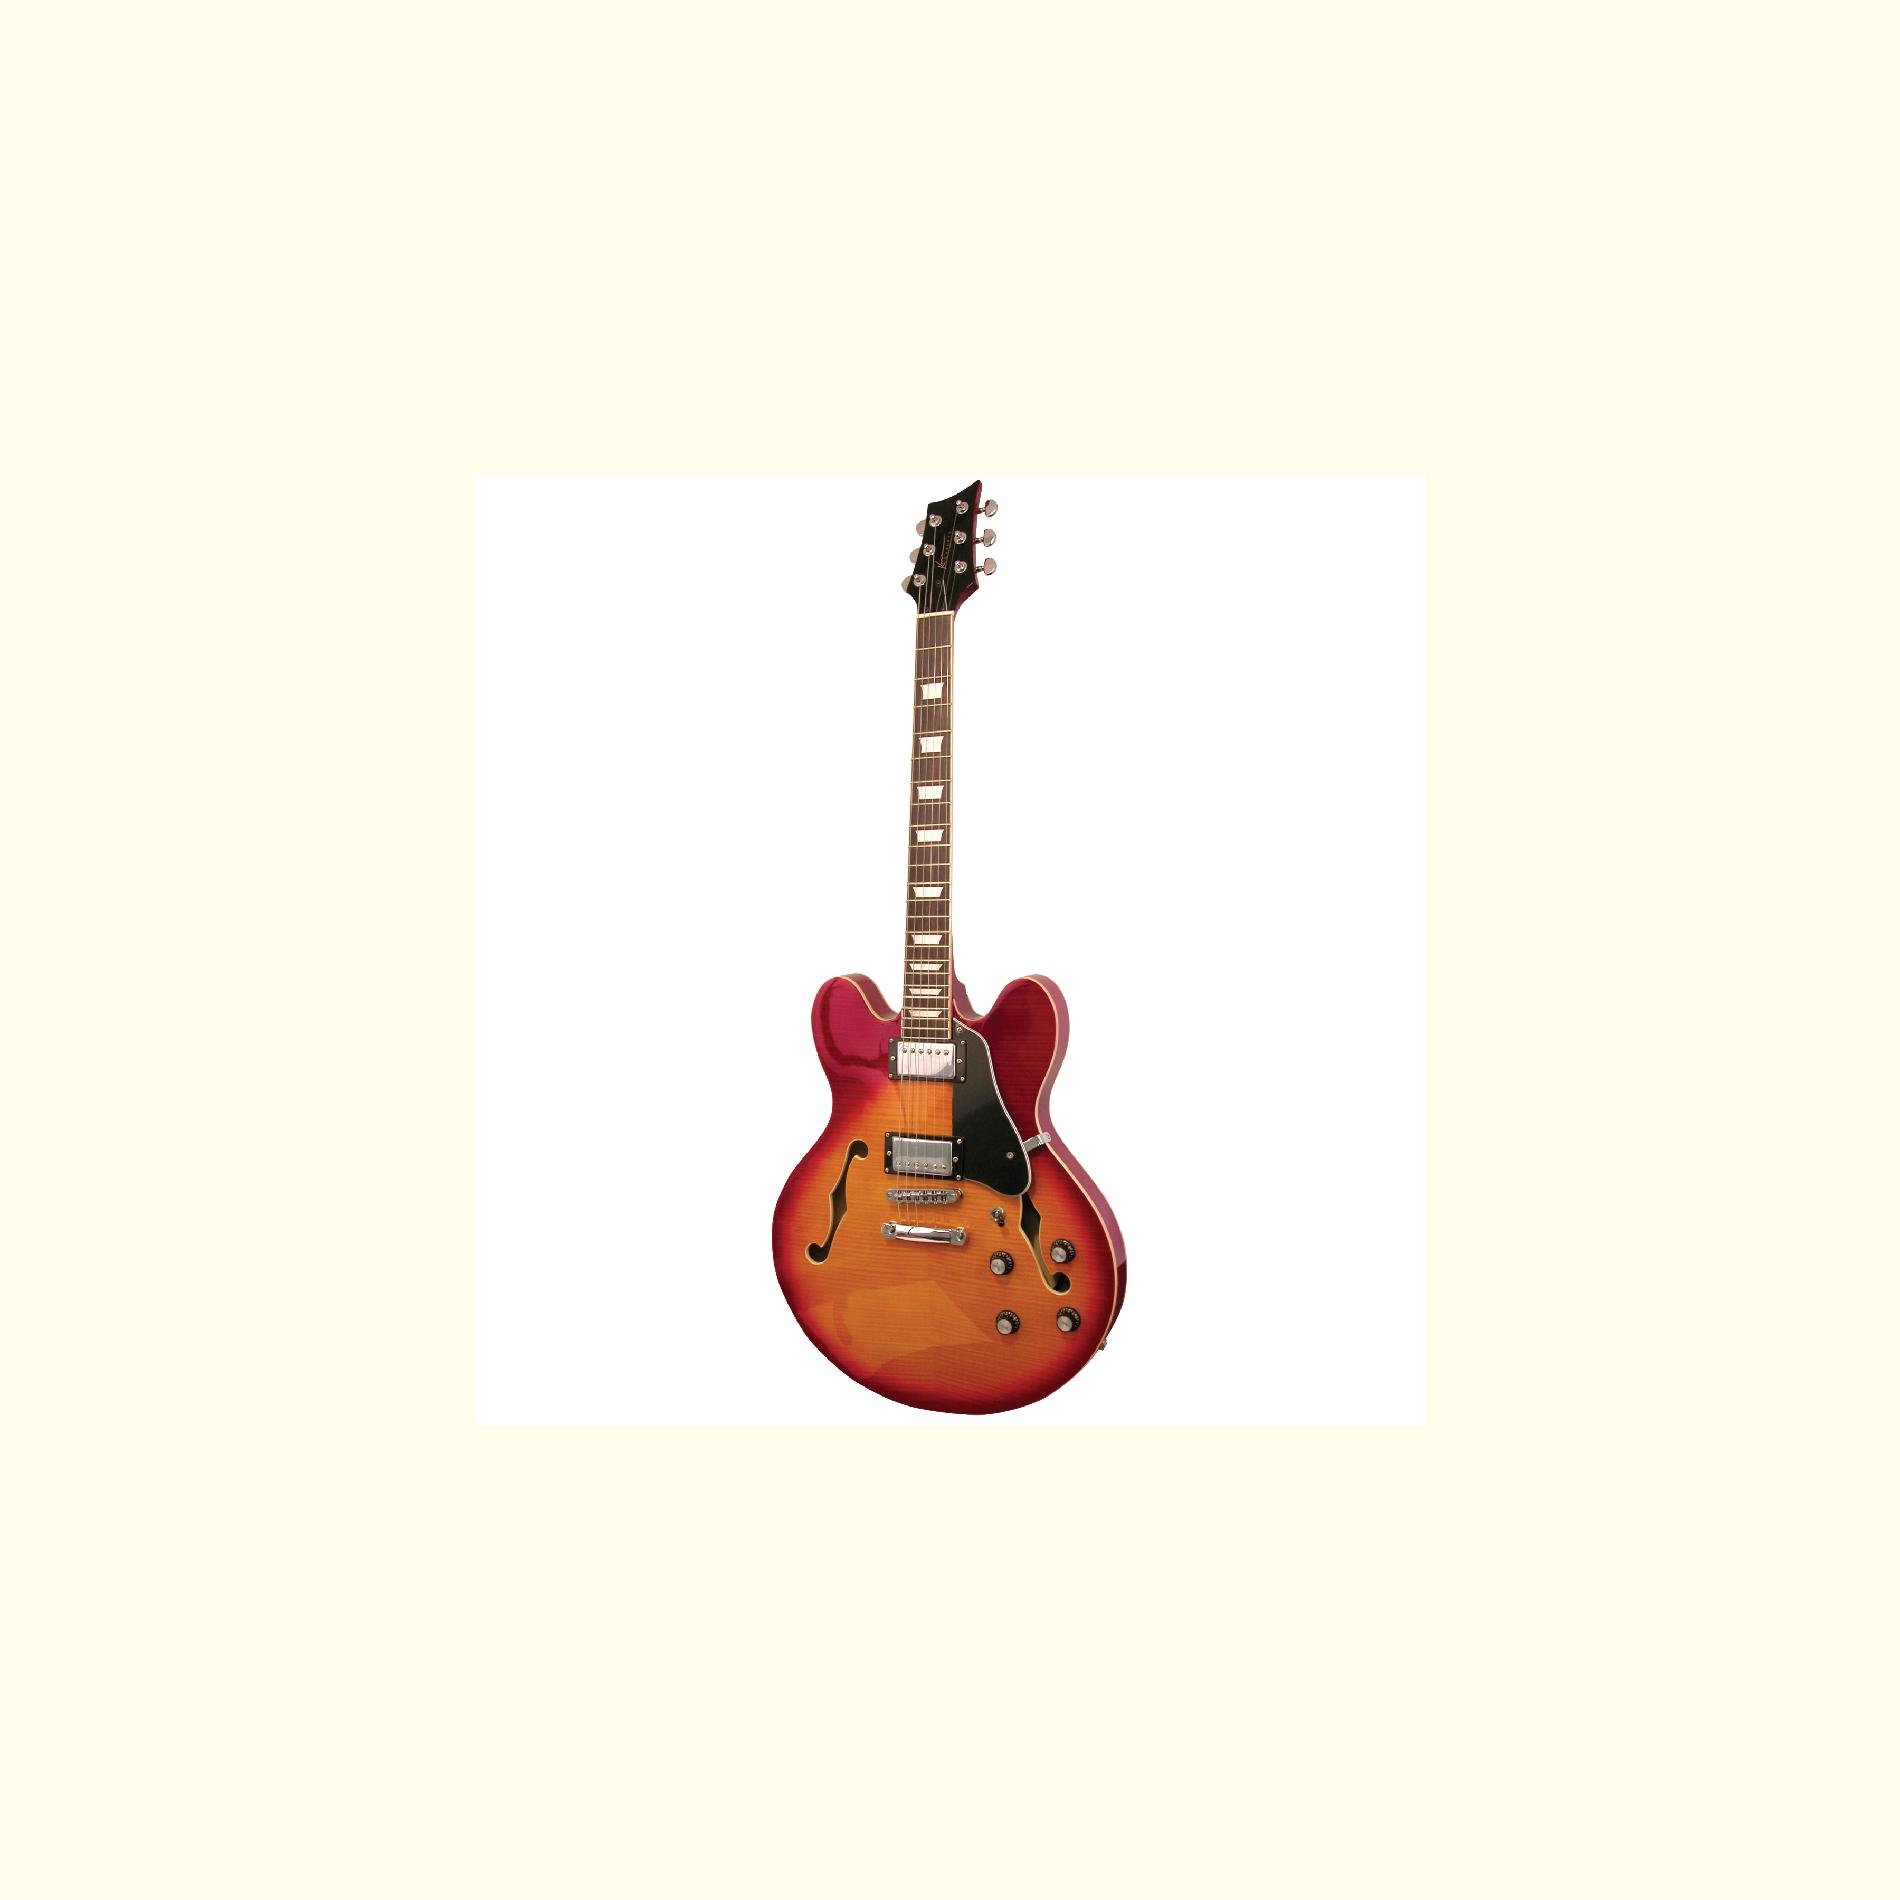 Kona Flamed Semi Hollow Body Electric Guitar With Custim Fit Case